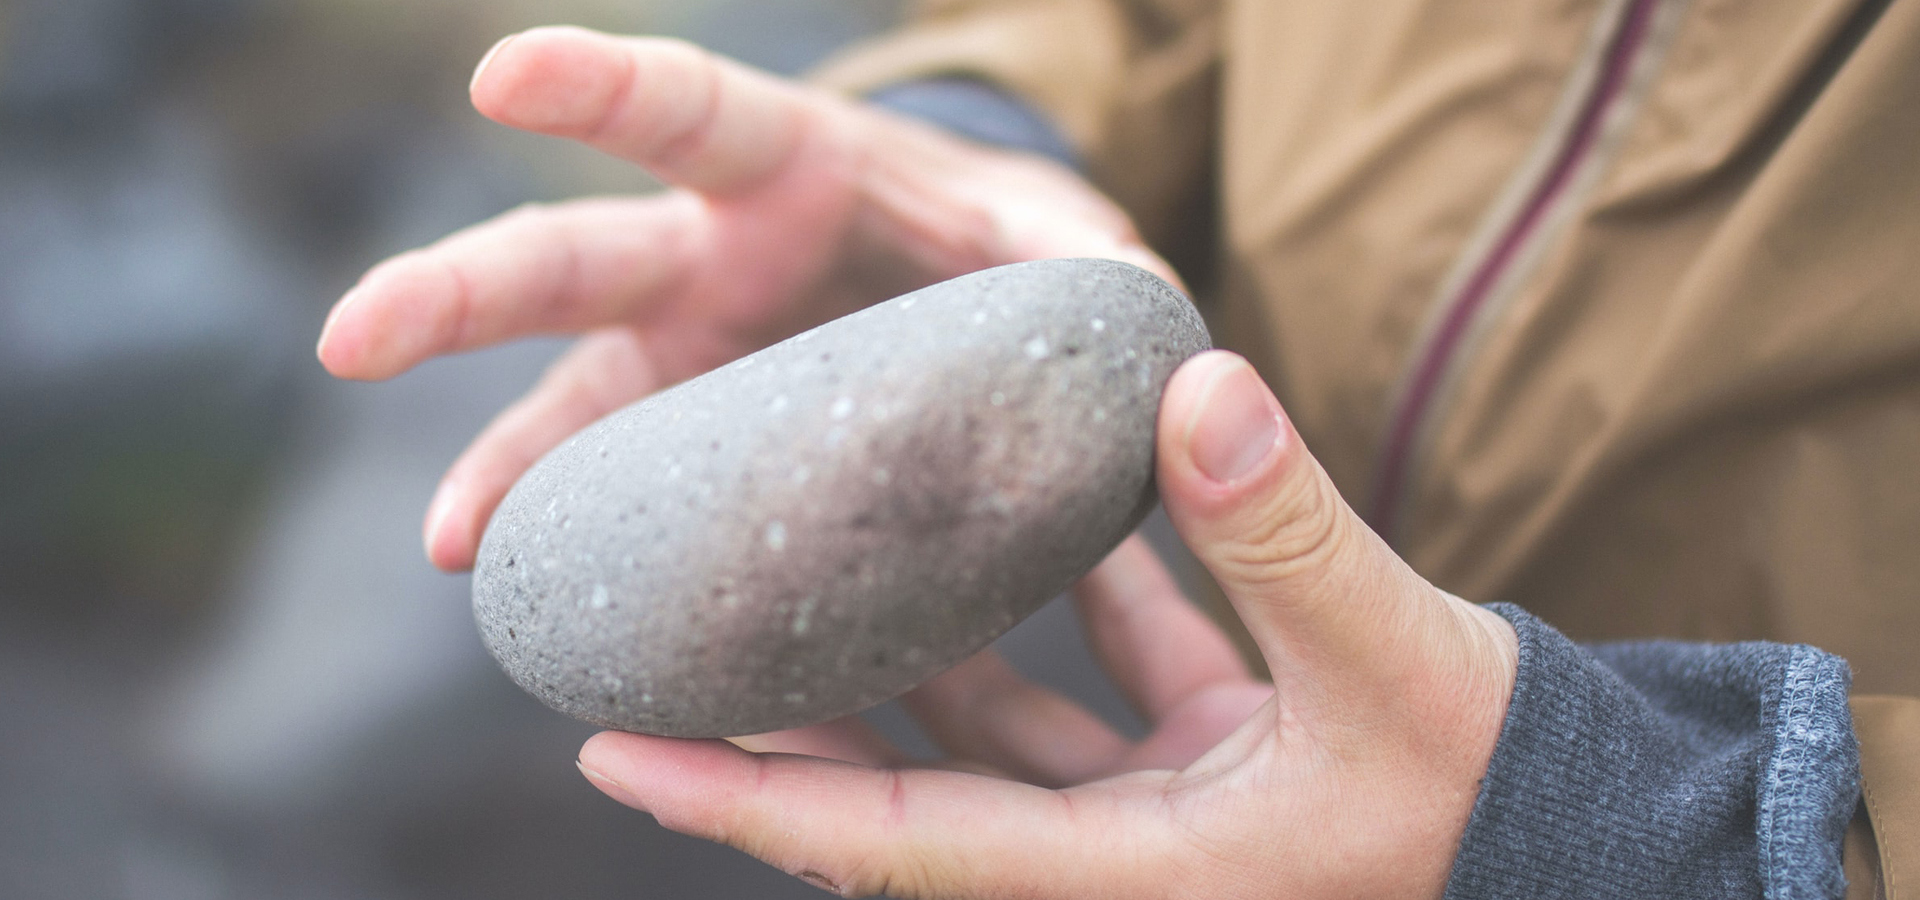 Child holding a rock in their hands